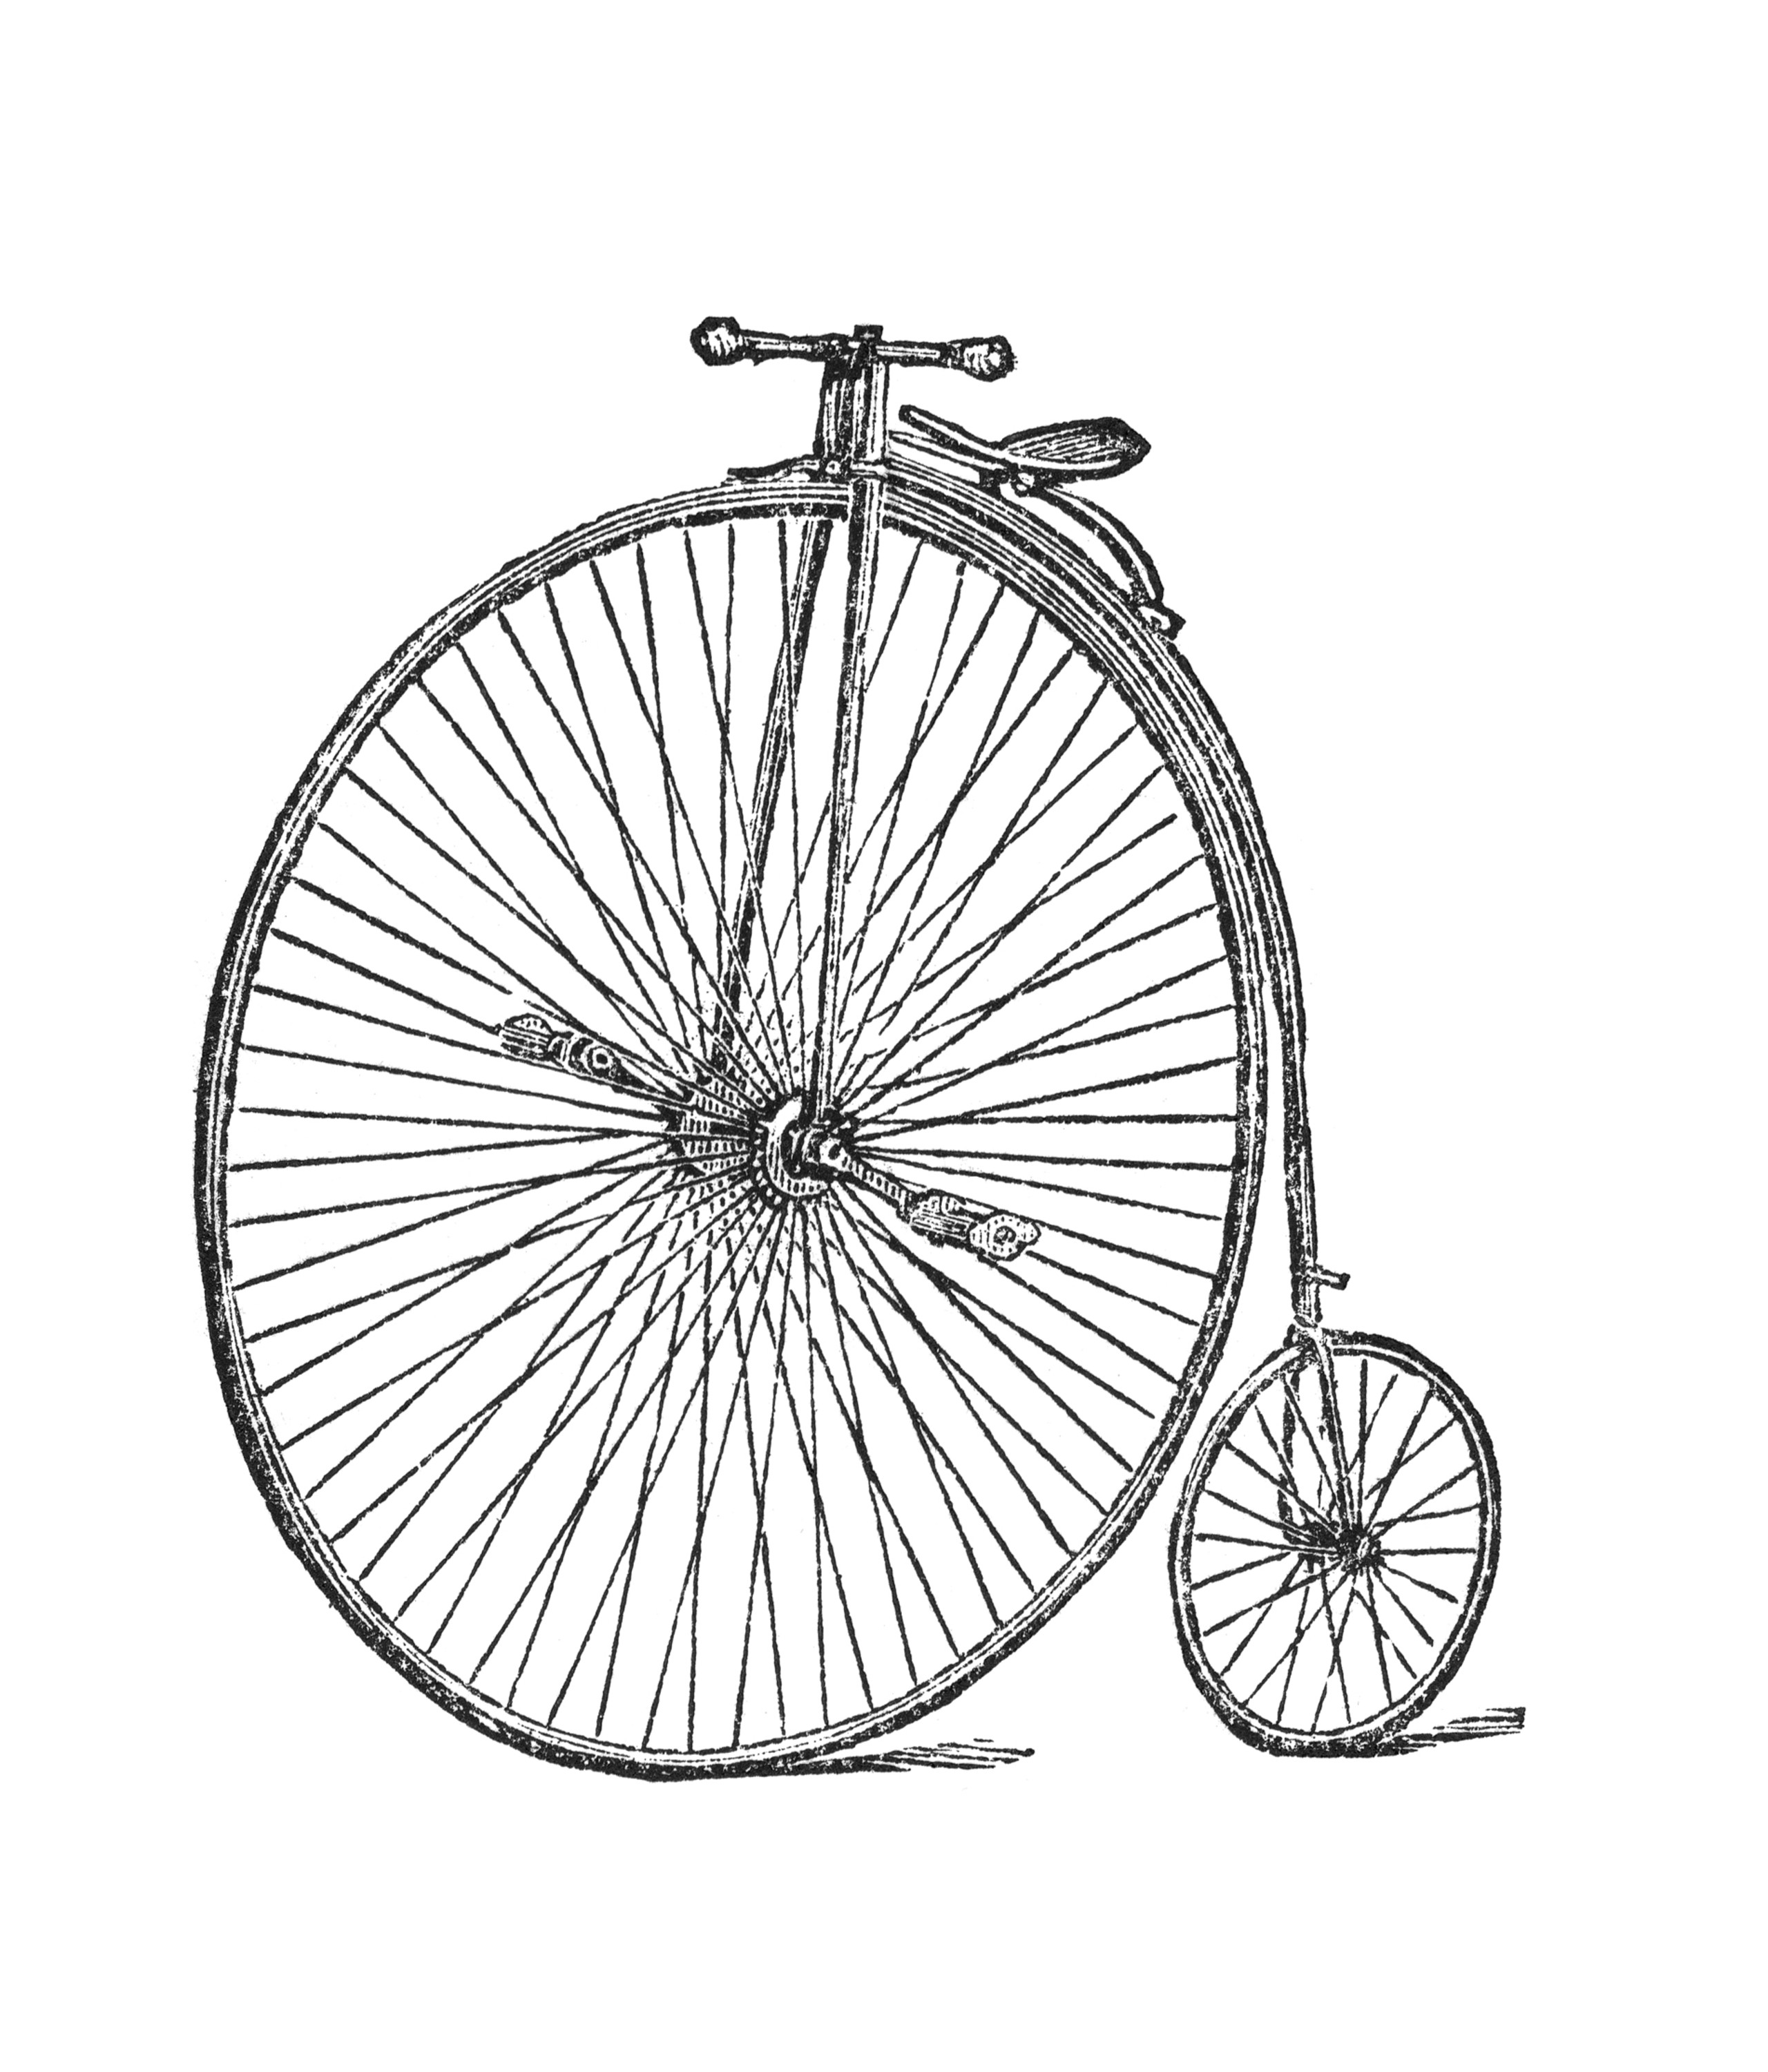 About the Penny-farthing – Henry's Eclectic